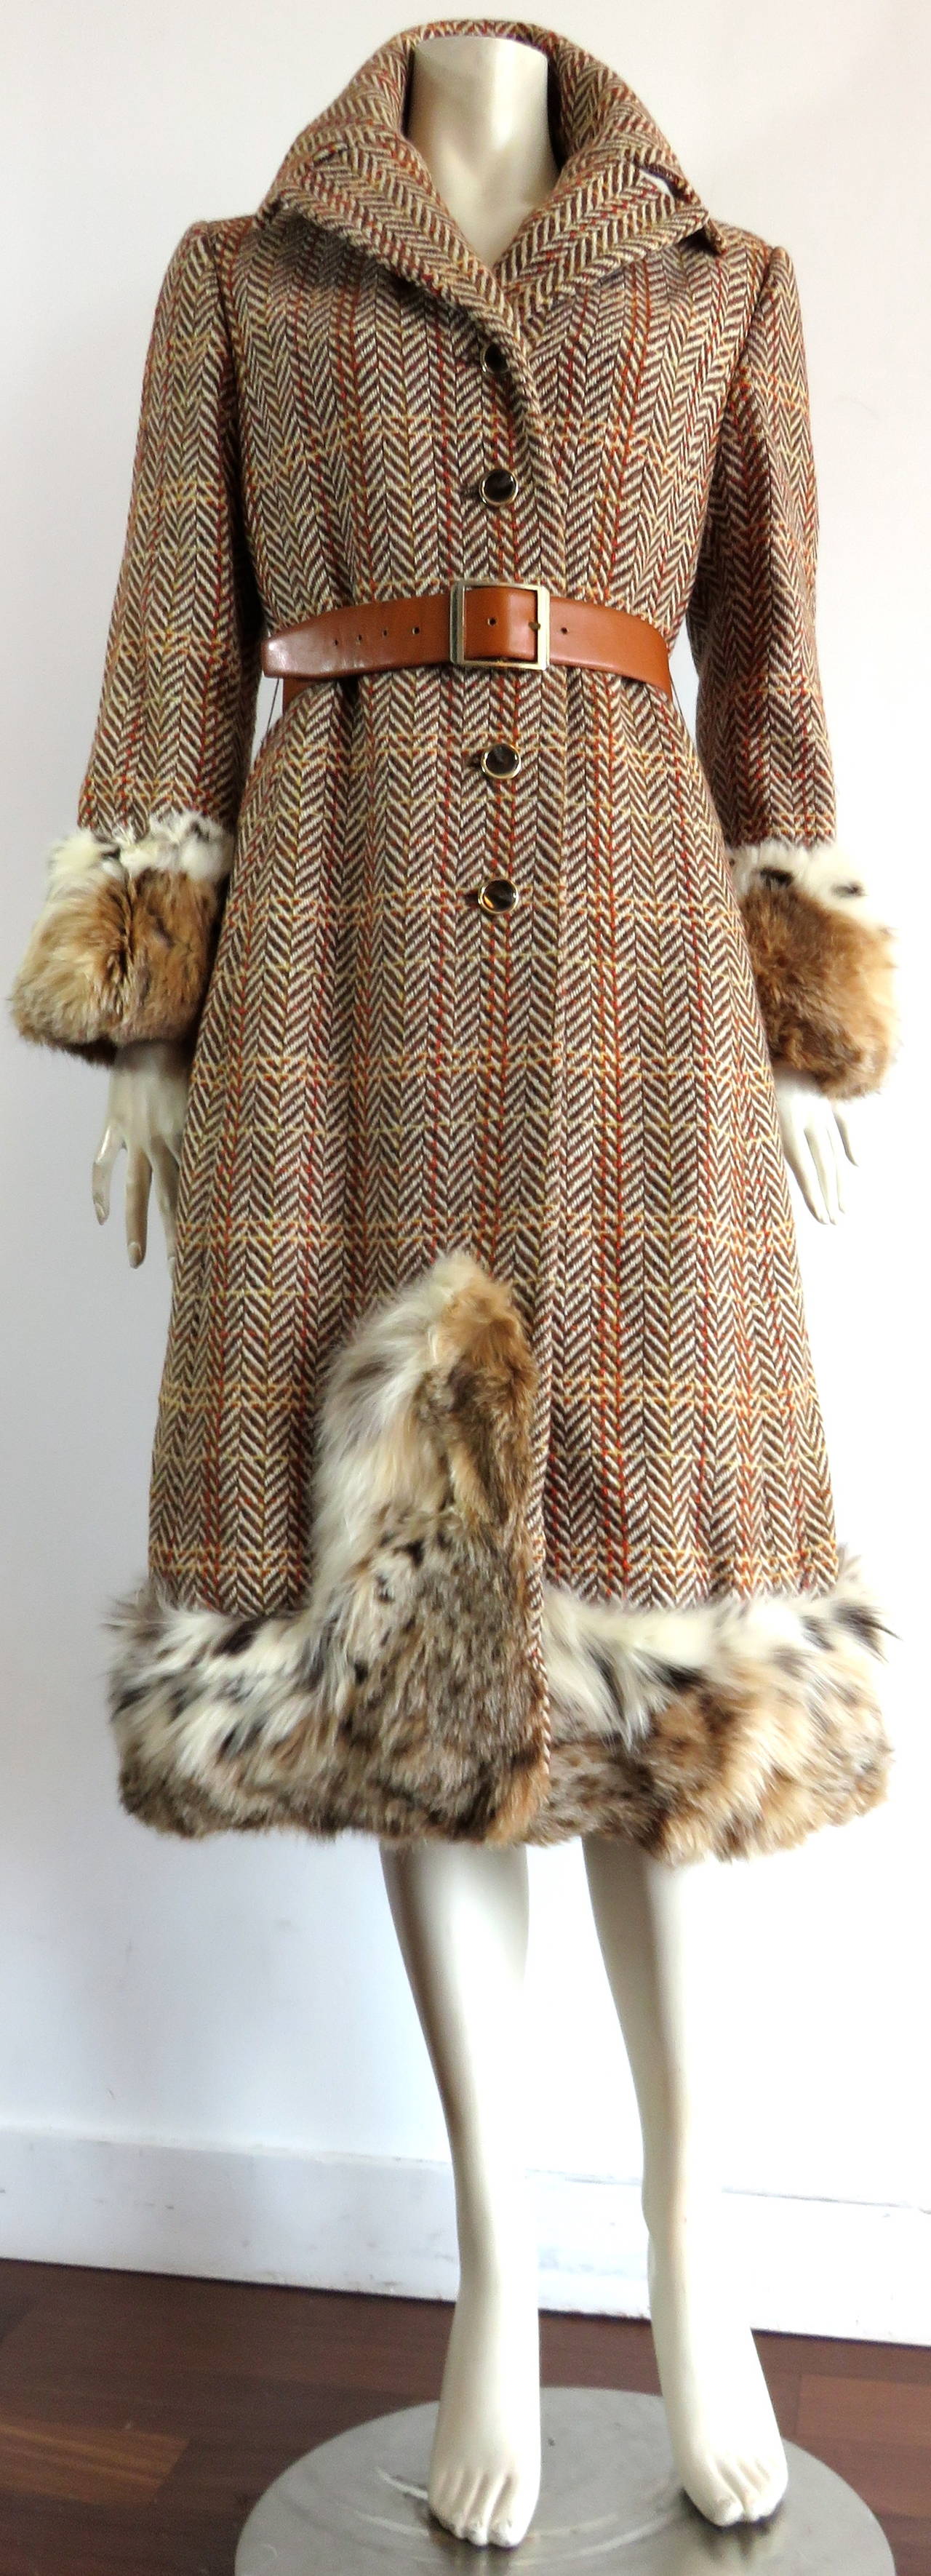 Vintage CHRISTIAN DIOR, wool tweed midi-coat with genuine Lynx fur detailing from Fall/Winter 1970. 

The same style coat was featured in the August 1970 issue of Harper's Bazzar magazine, as shown in the photo section.

The tan and brass belt